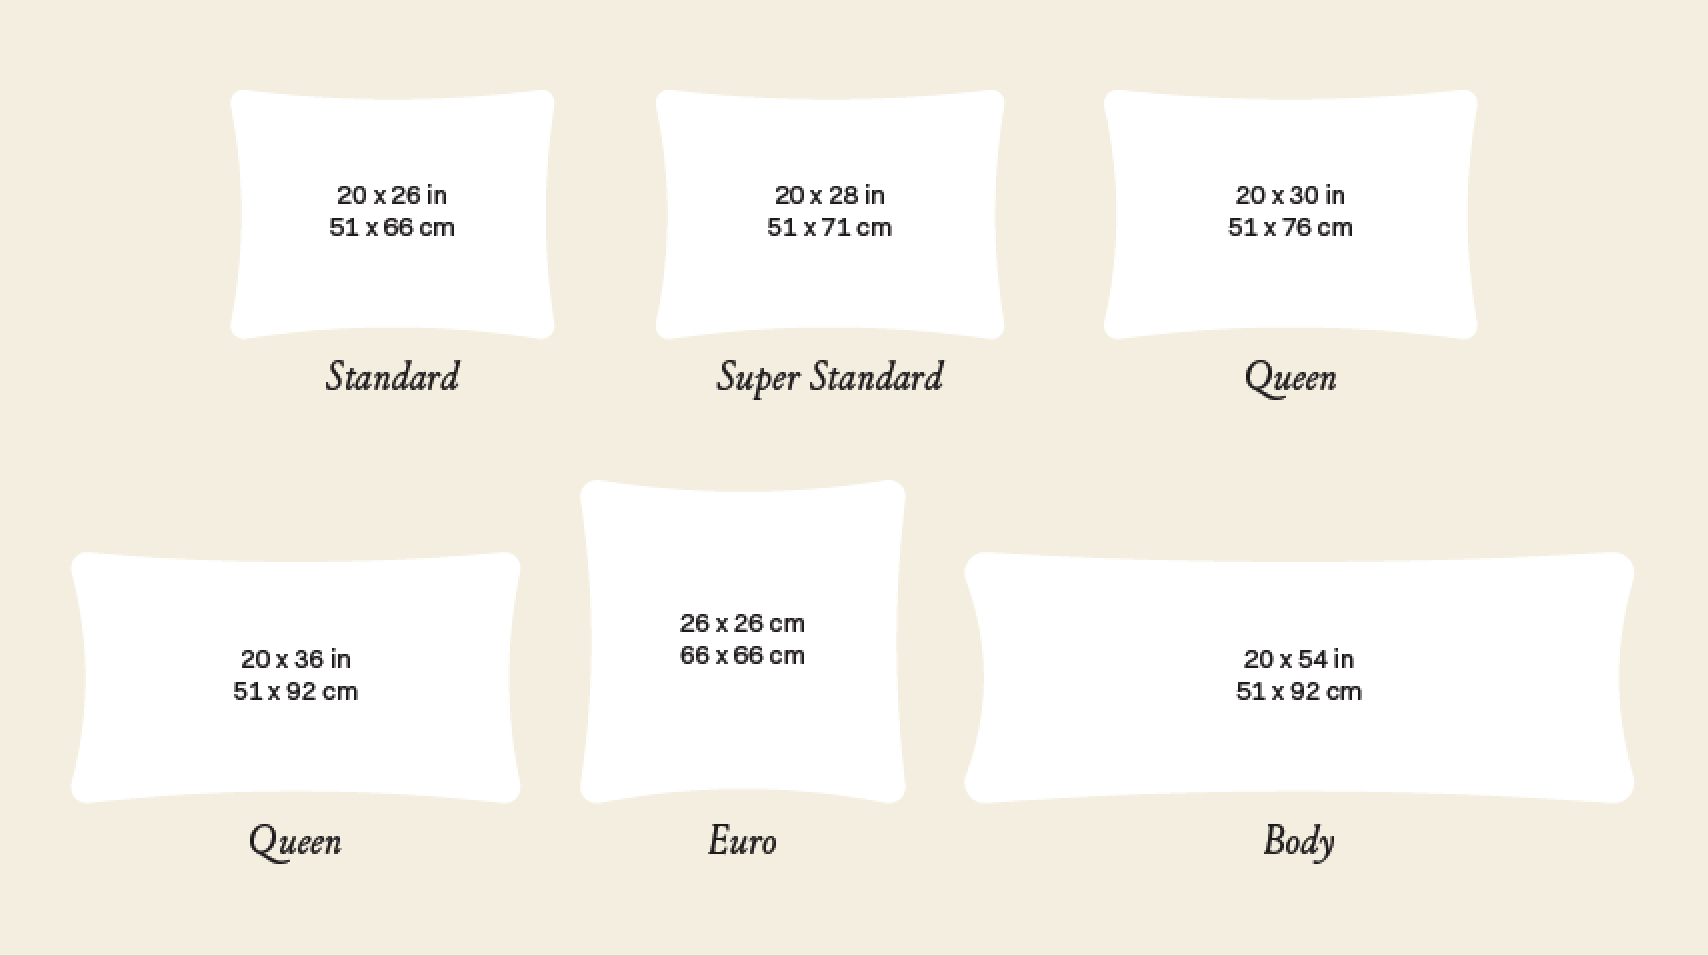 Bed Pillow Sizes Guide